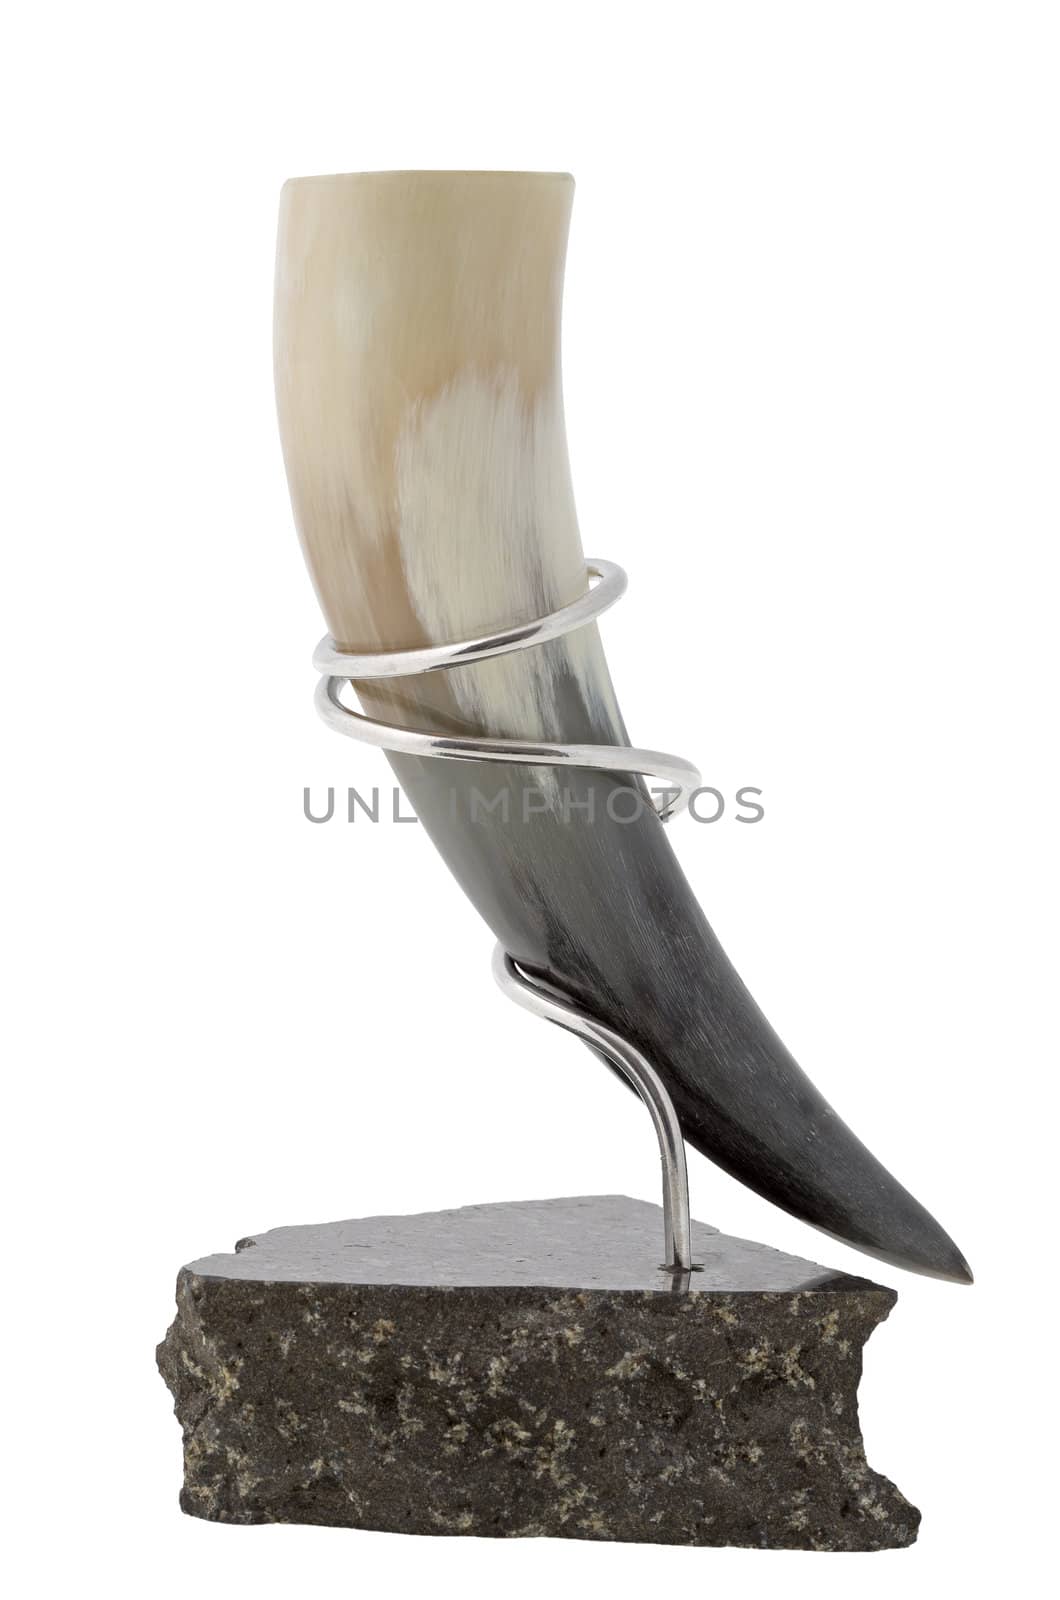 A drinking horn made from a sheep's horn in a silver stand